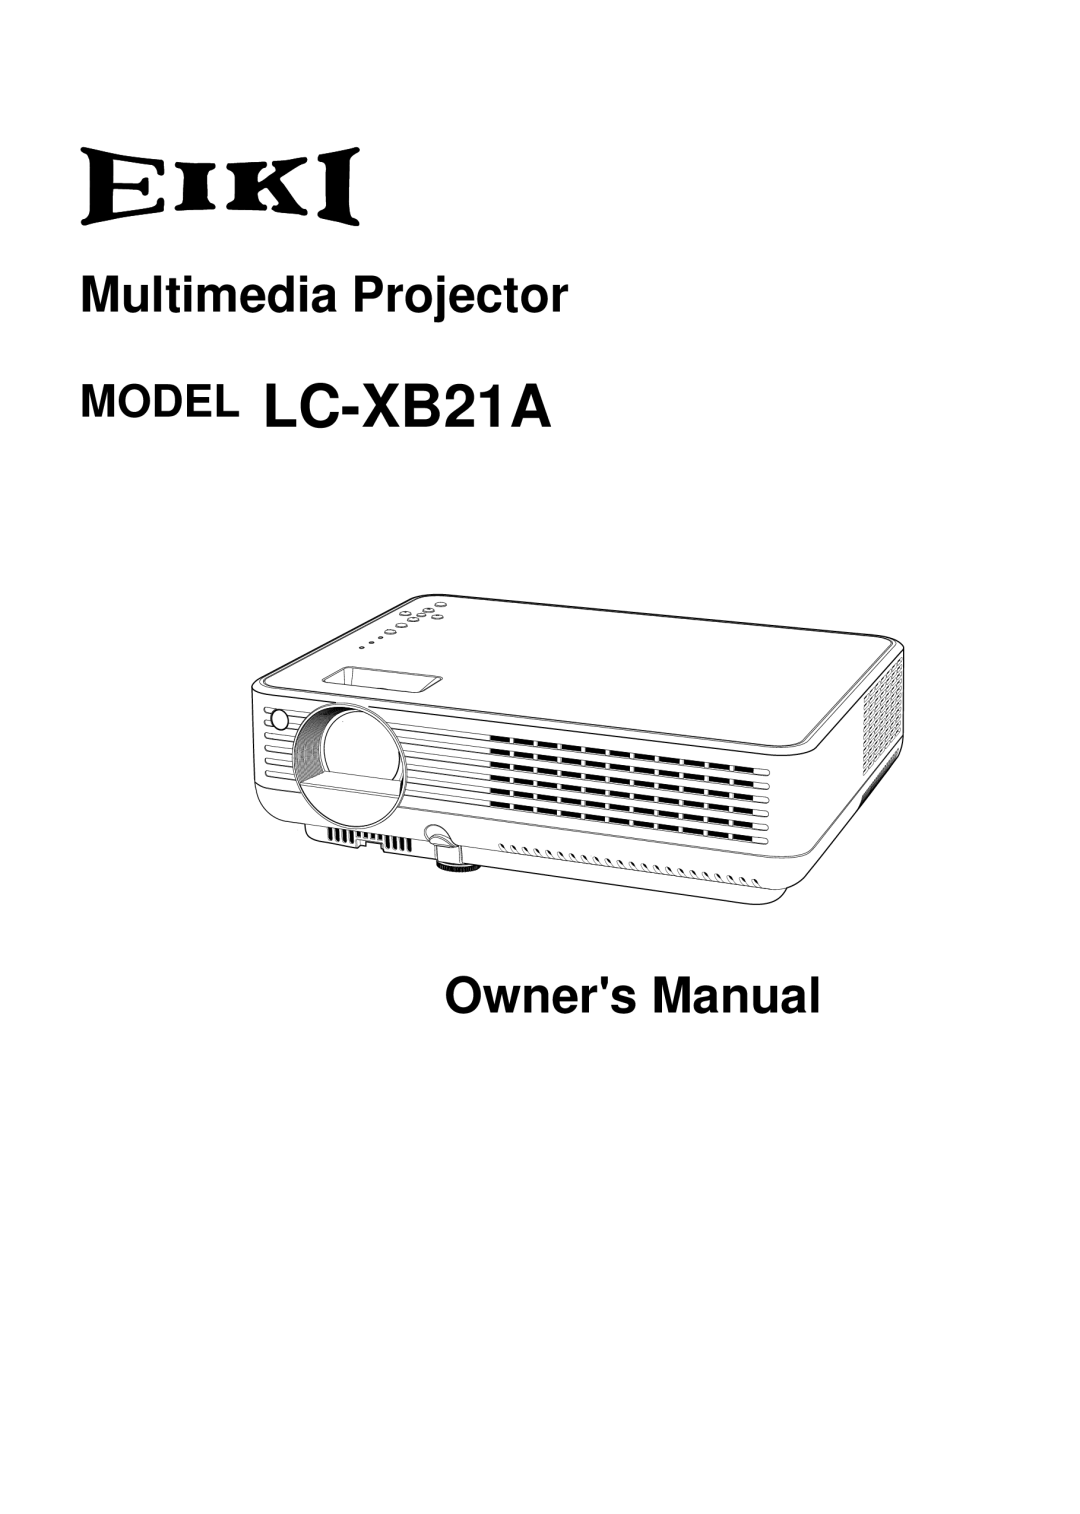 Eiki owner manual MODEL LC-XB21A, Multimedia Projector 